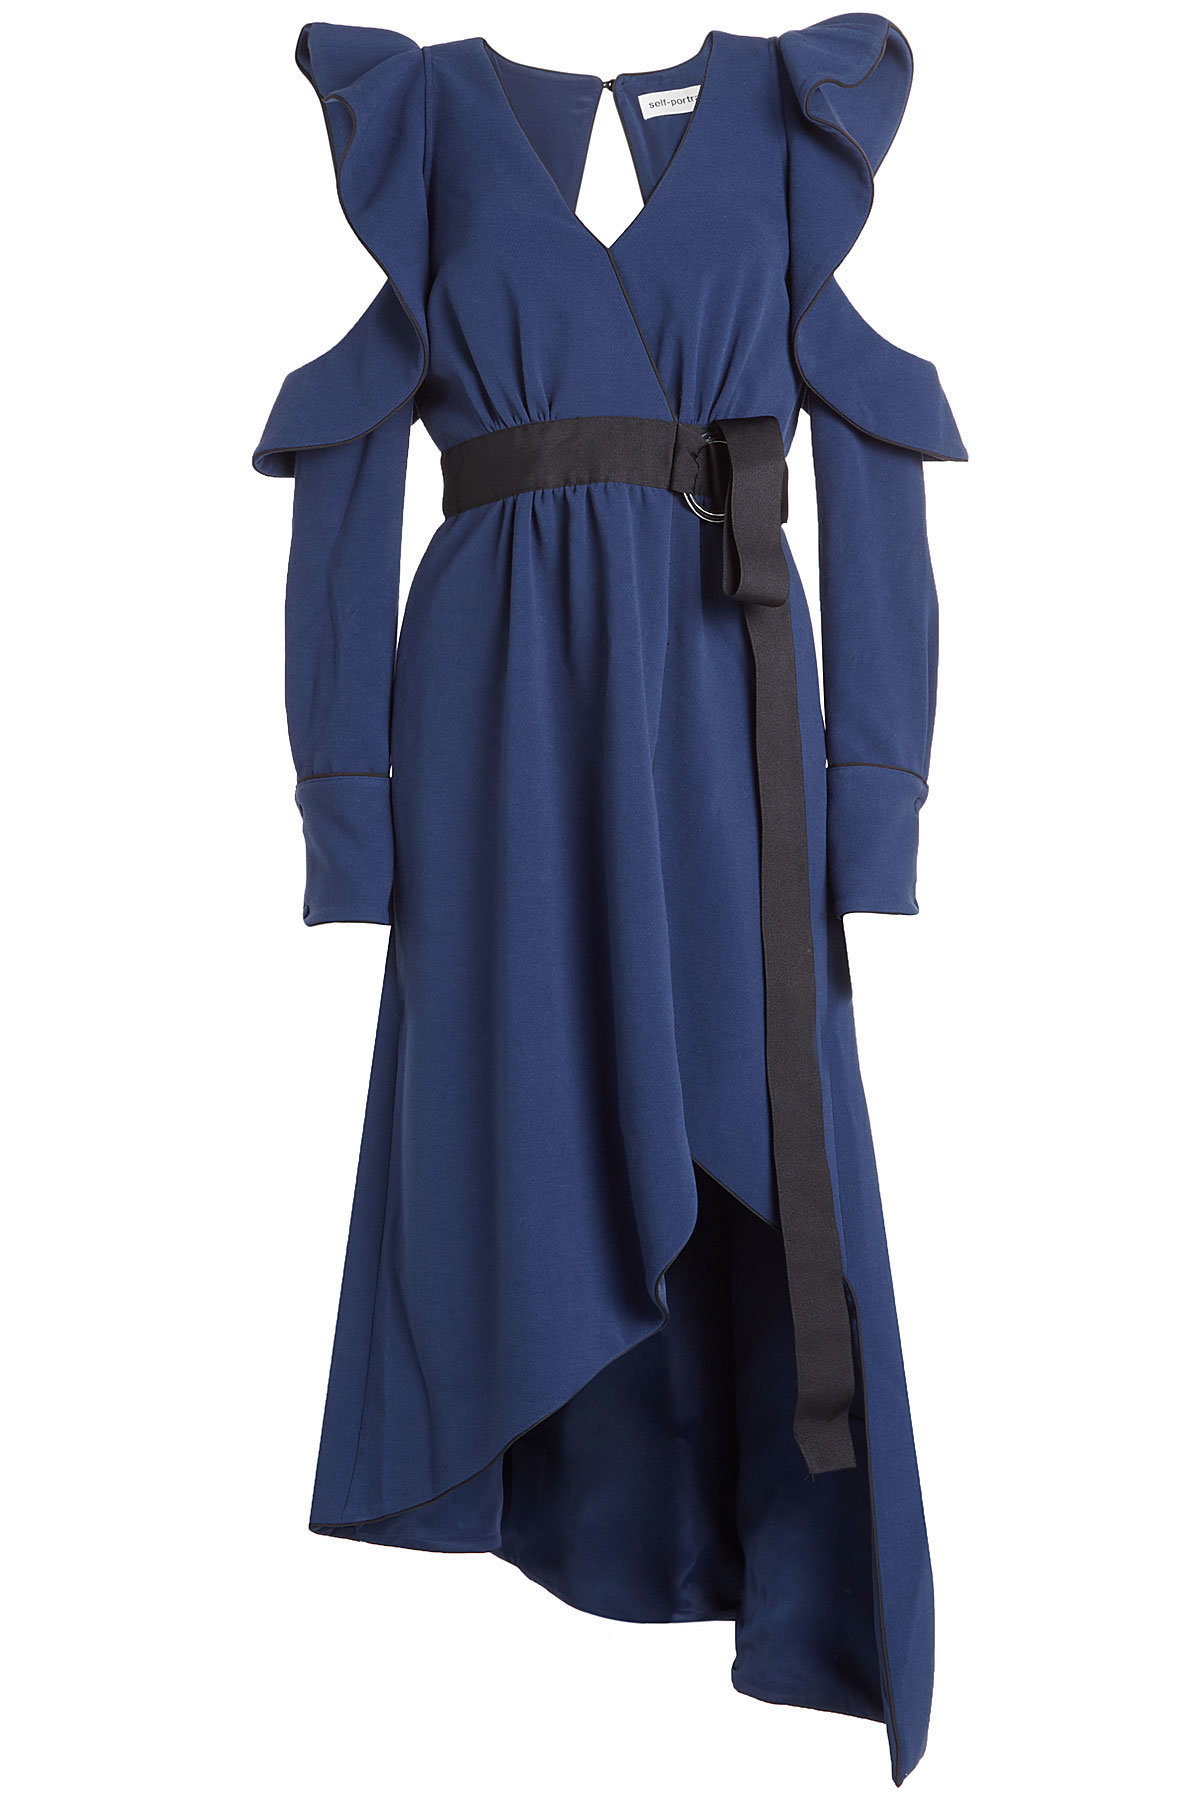 Self-Portrait - Dress with Cold-Shoulders, Ruffle Trims and Belt